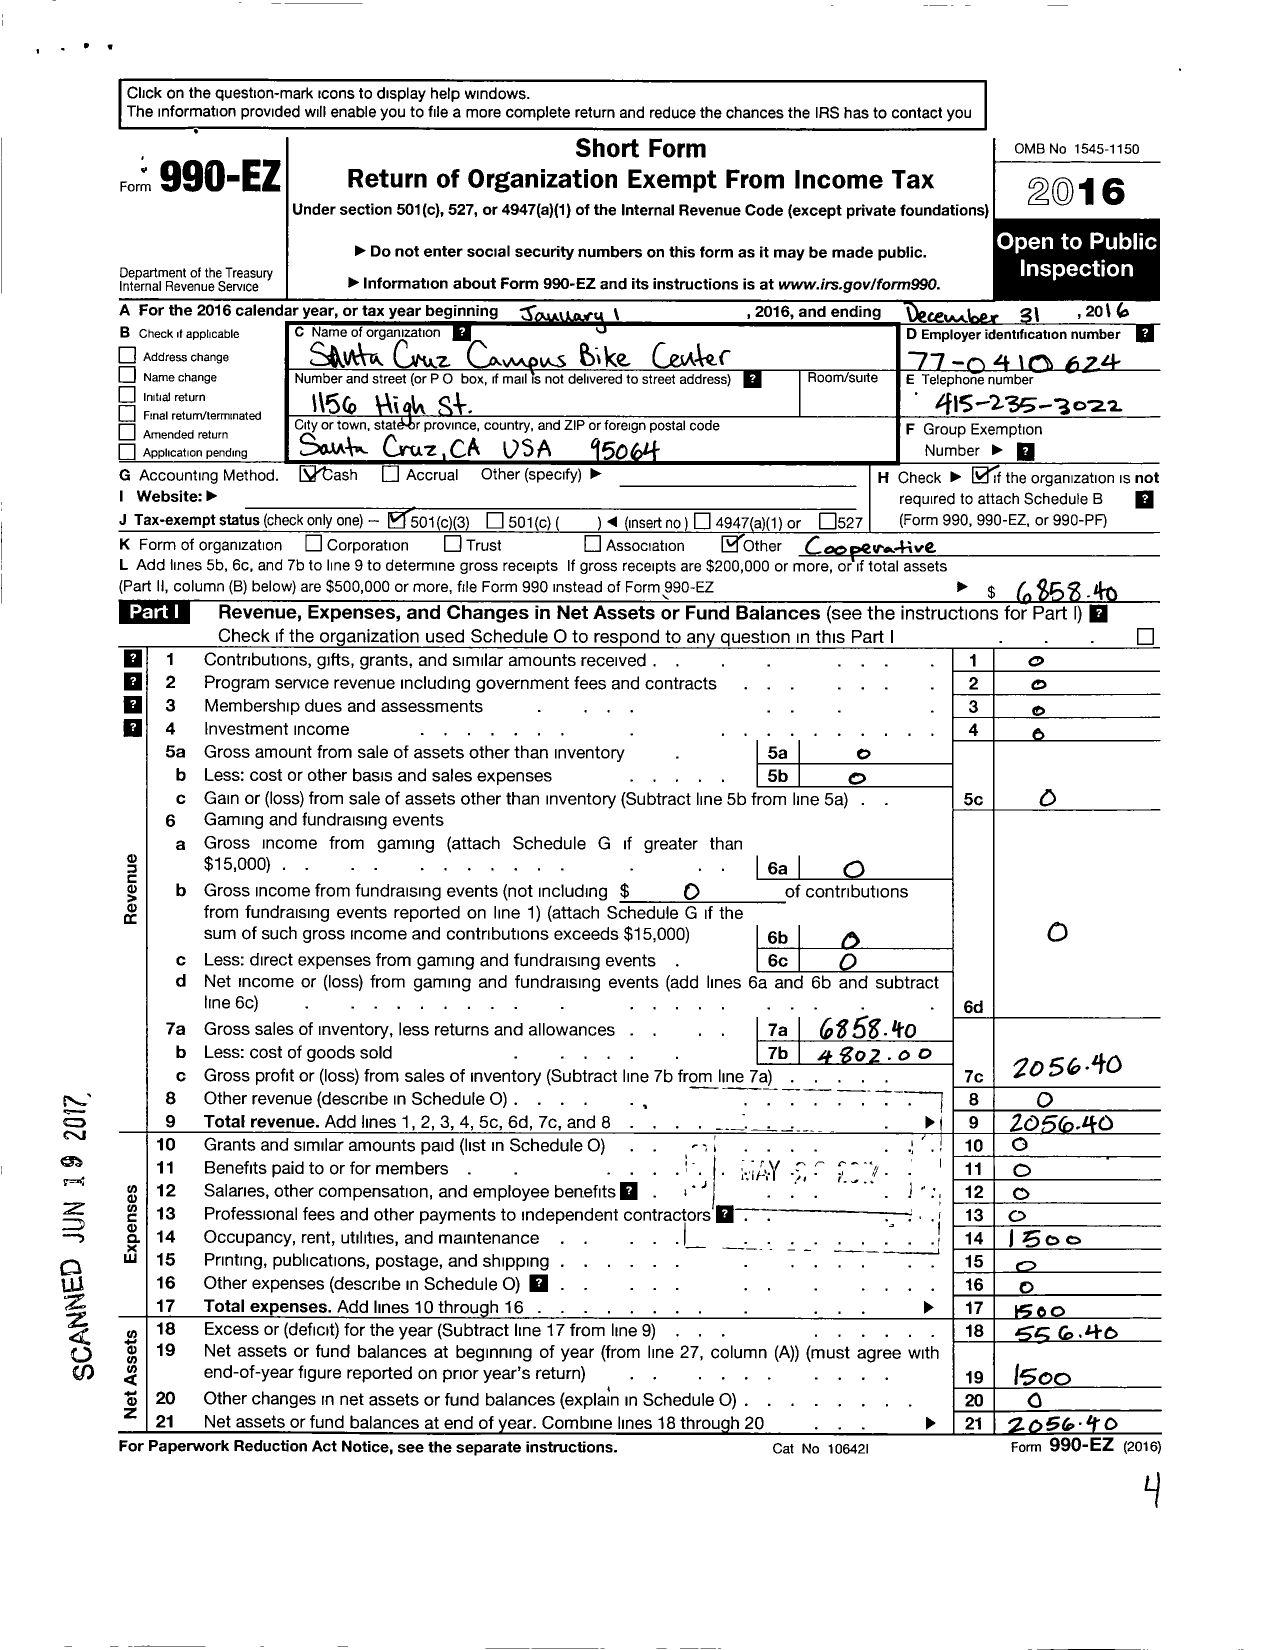 Image of first page of 2016 Form 990EZ for Santa Cruz Campus Bike Center